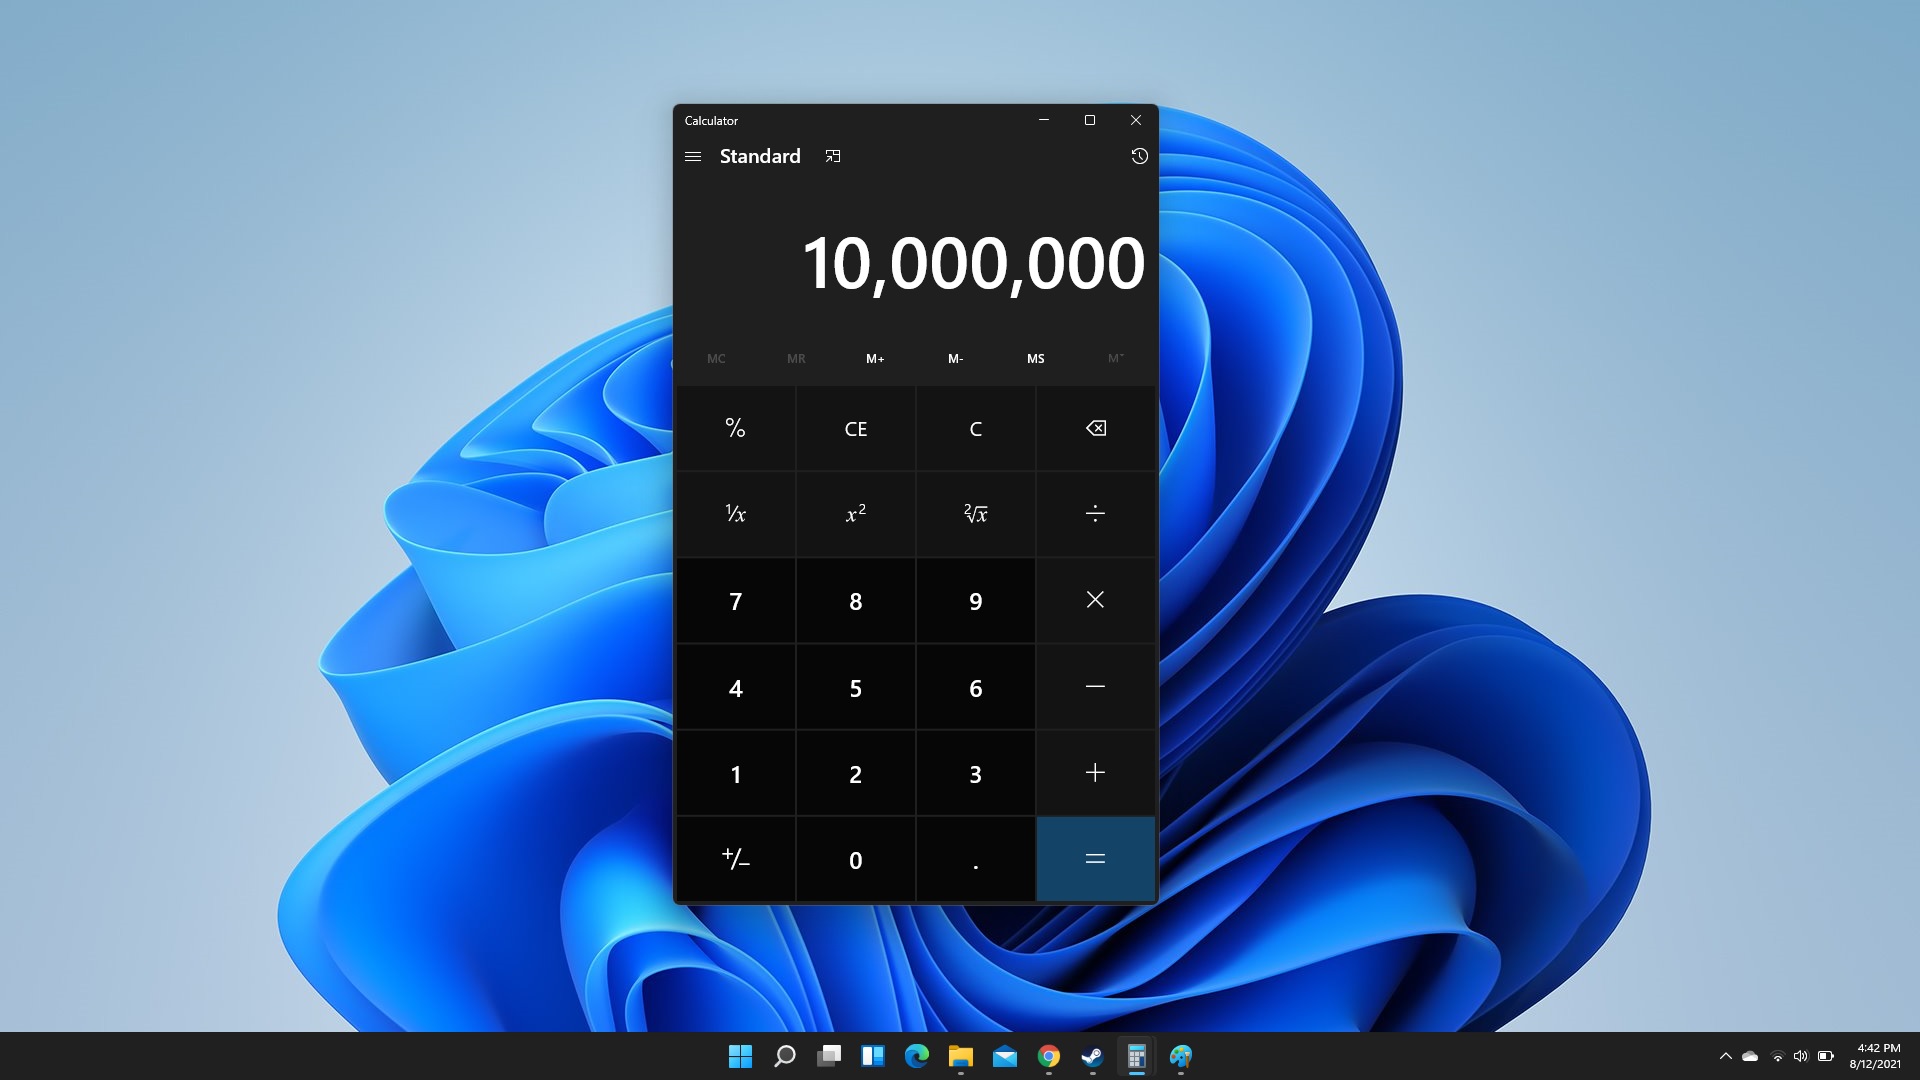 Windows 11 The new Calculator, Snipping Tool, Mail and Calendar apps